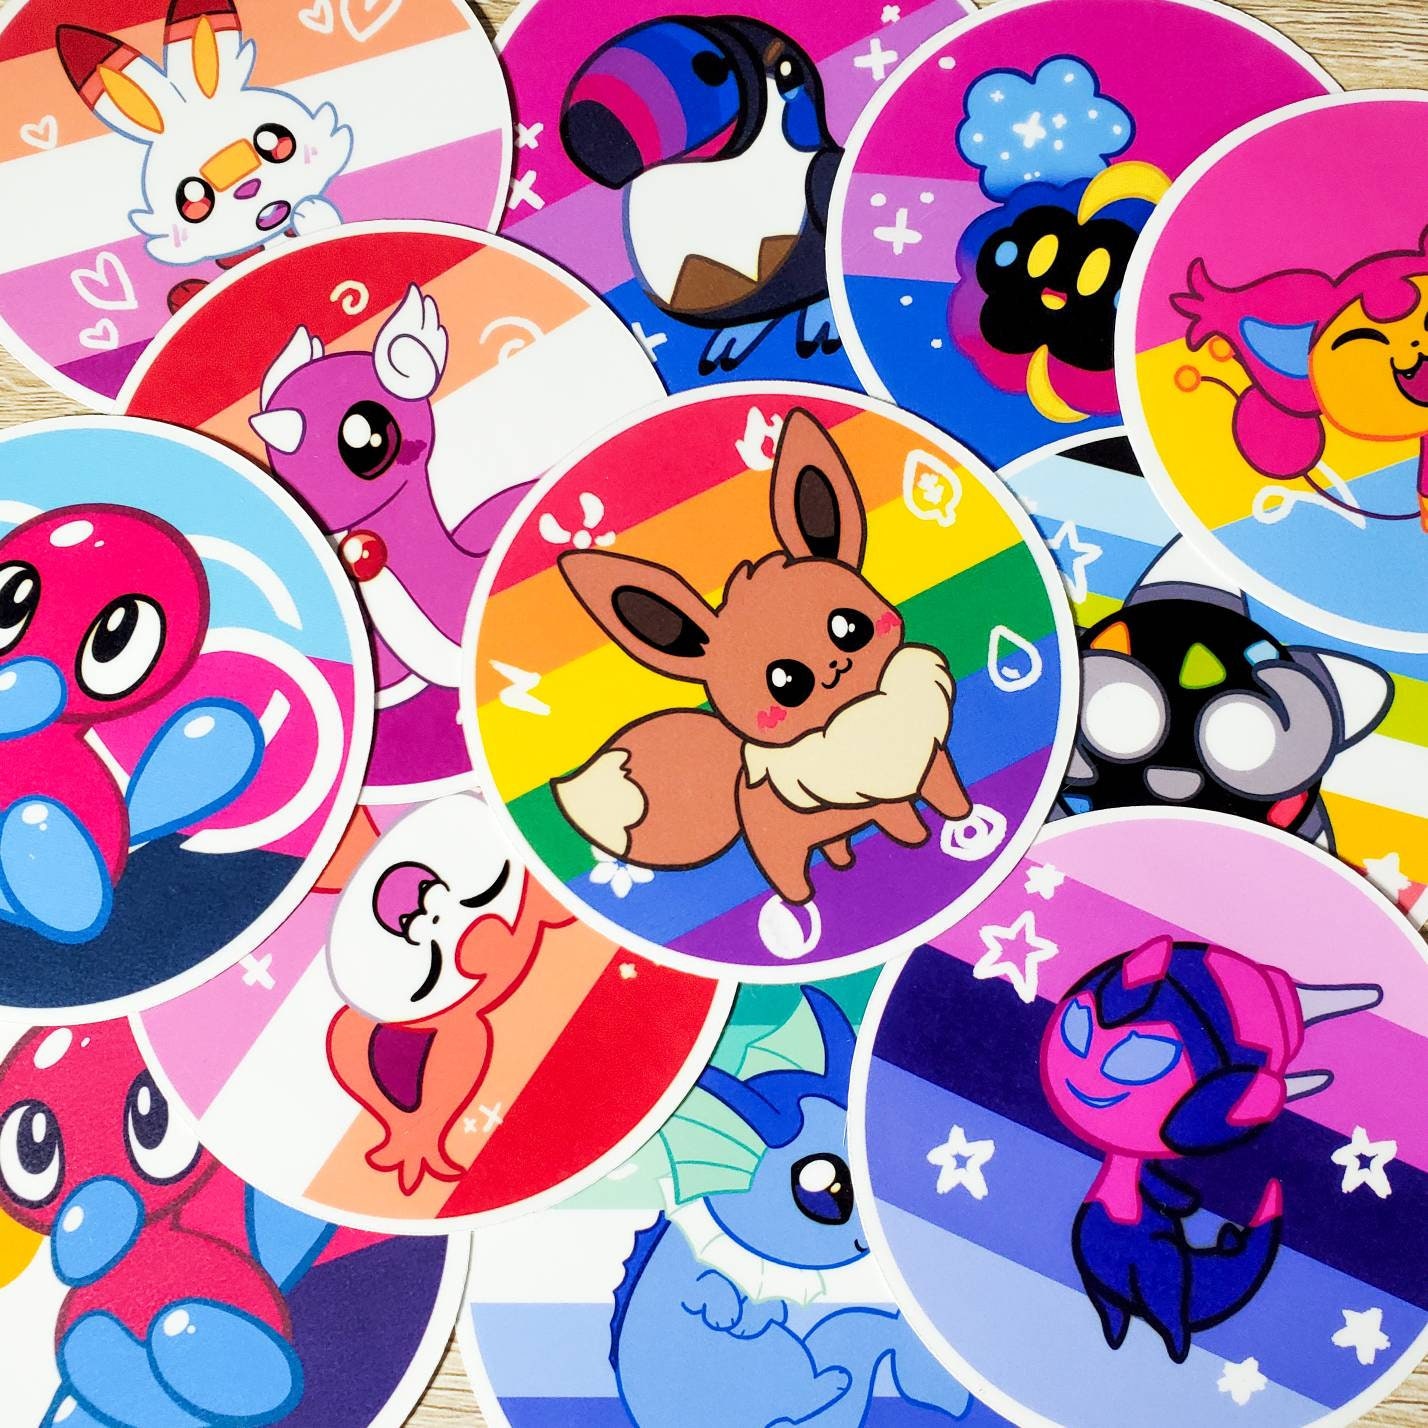 LGBTQ Set 1 Pokemon Round Vinyl Stickers 3 Inches Rainbow Gay Queer Lesbian  Bisexual Pansexual Polyamorous Abrosexual 